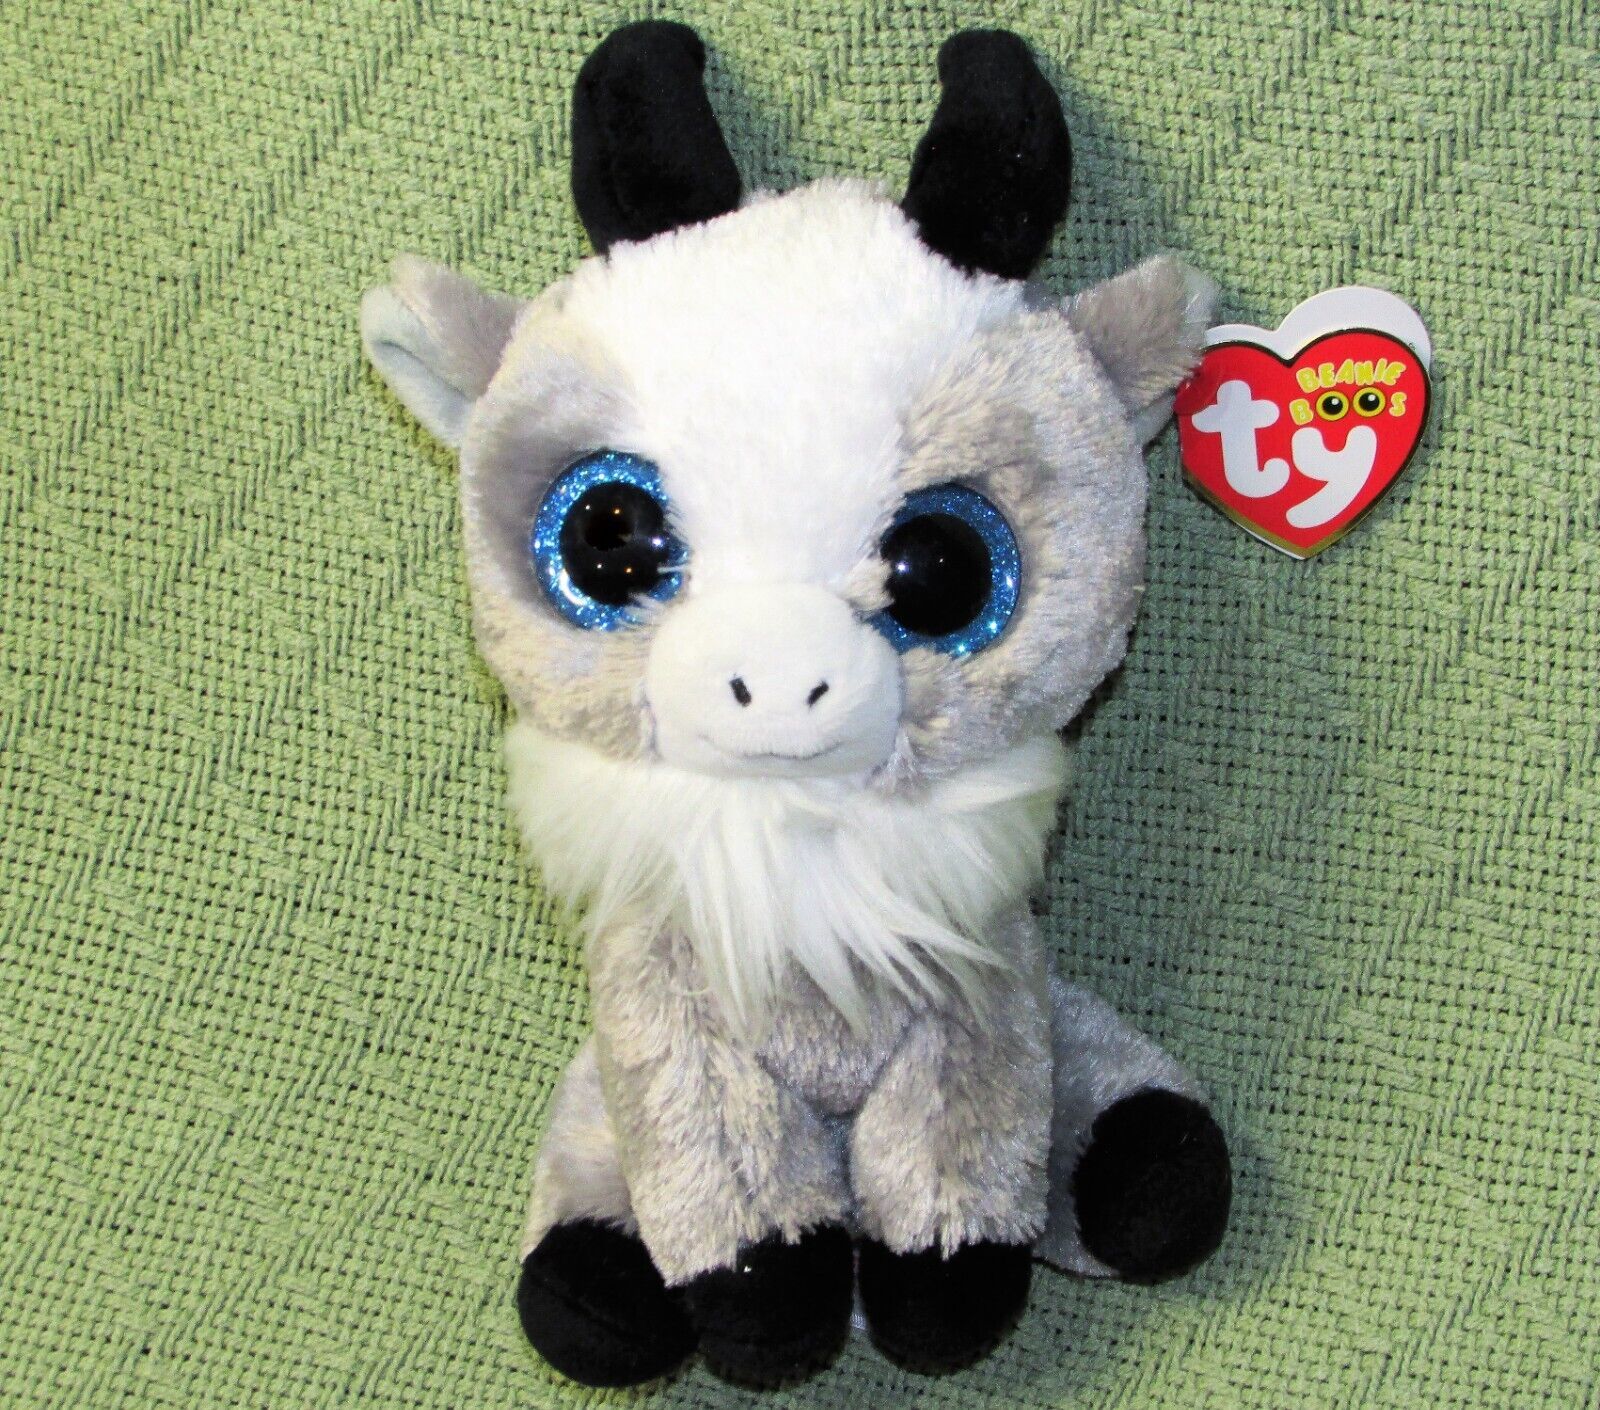 TY BEANIE BOOS GABBY THE GOAT 6" PLUSH WITH HEART SWING TAG BLUE GLITTER EYES - $10.80